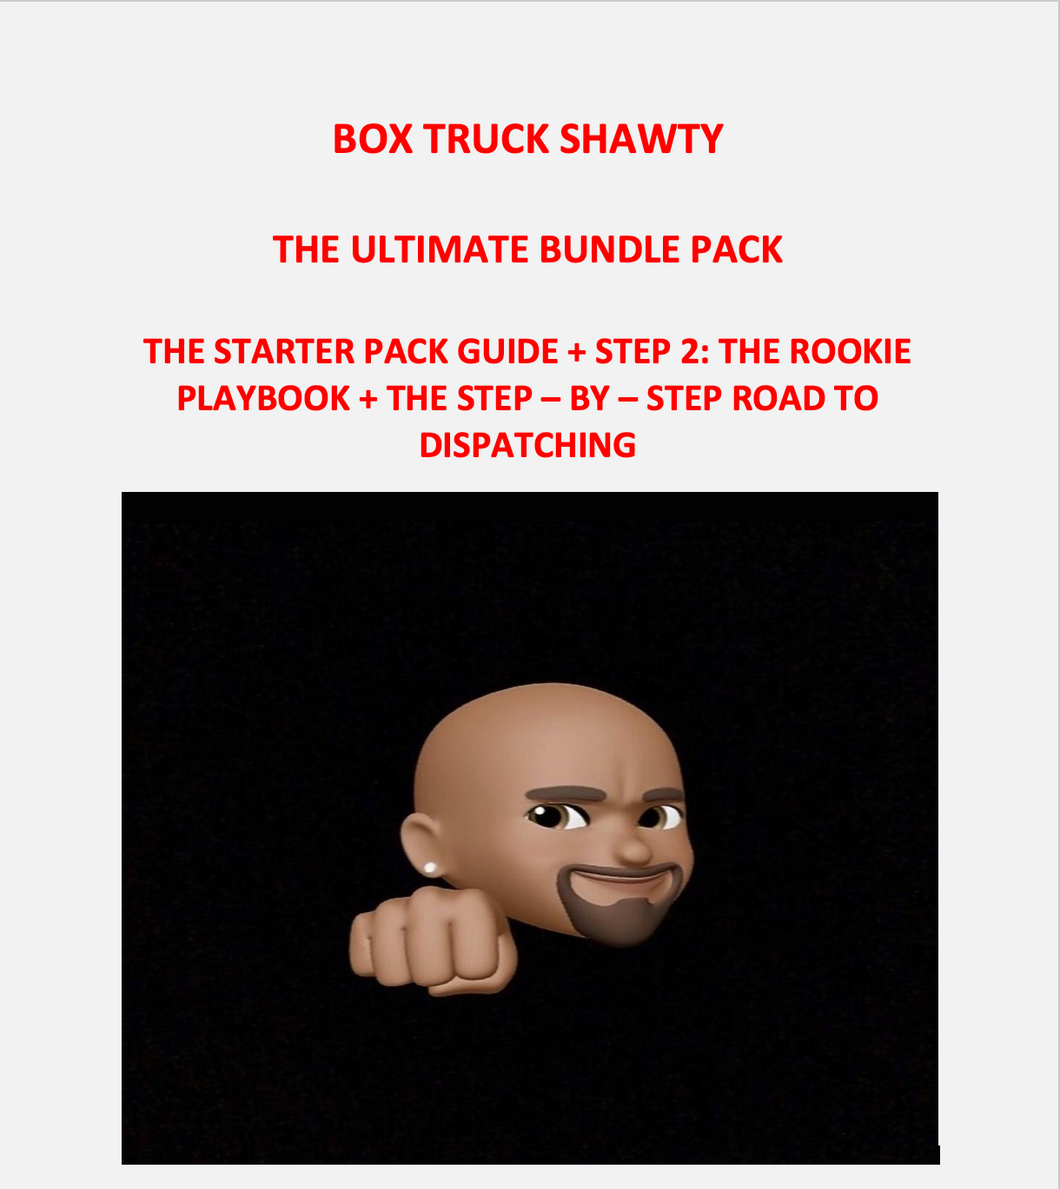 BOX TRUCK SHAWTY  - THE ULTIMATE STEP BY STEP STARTER PACK GUIDE